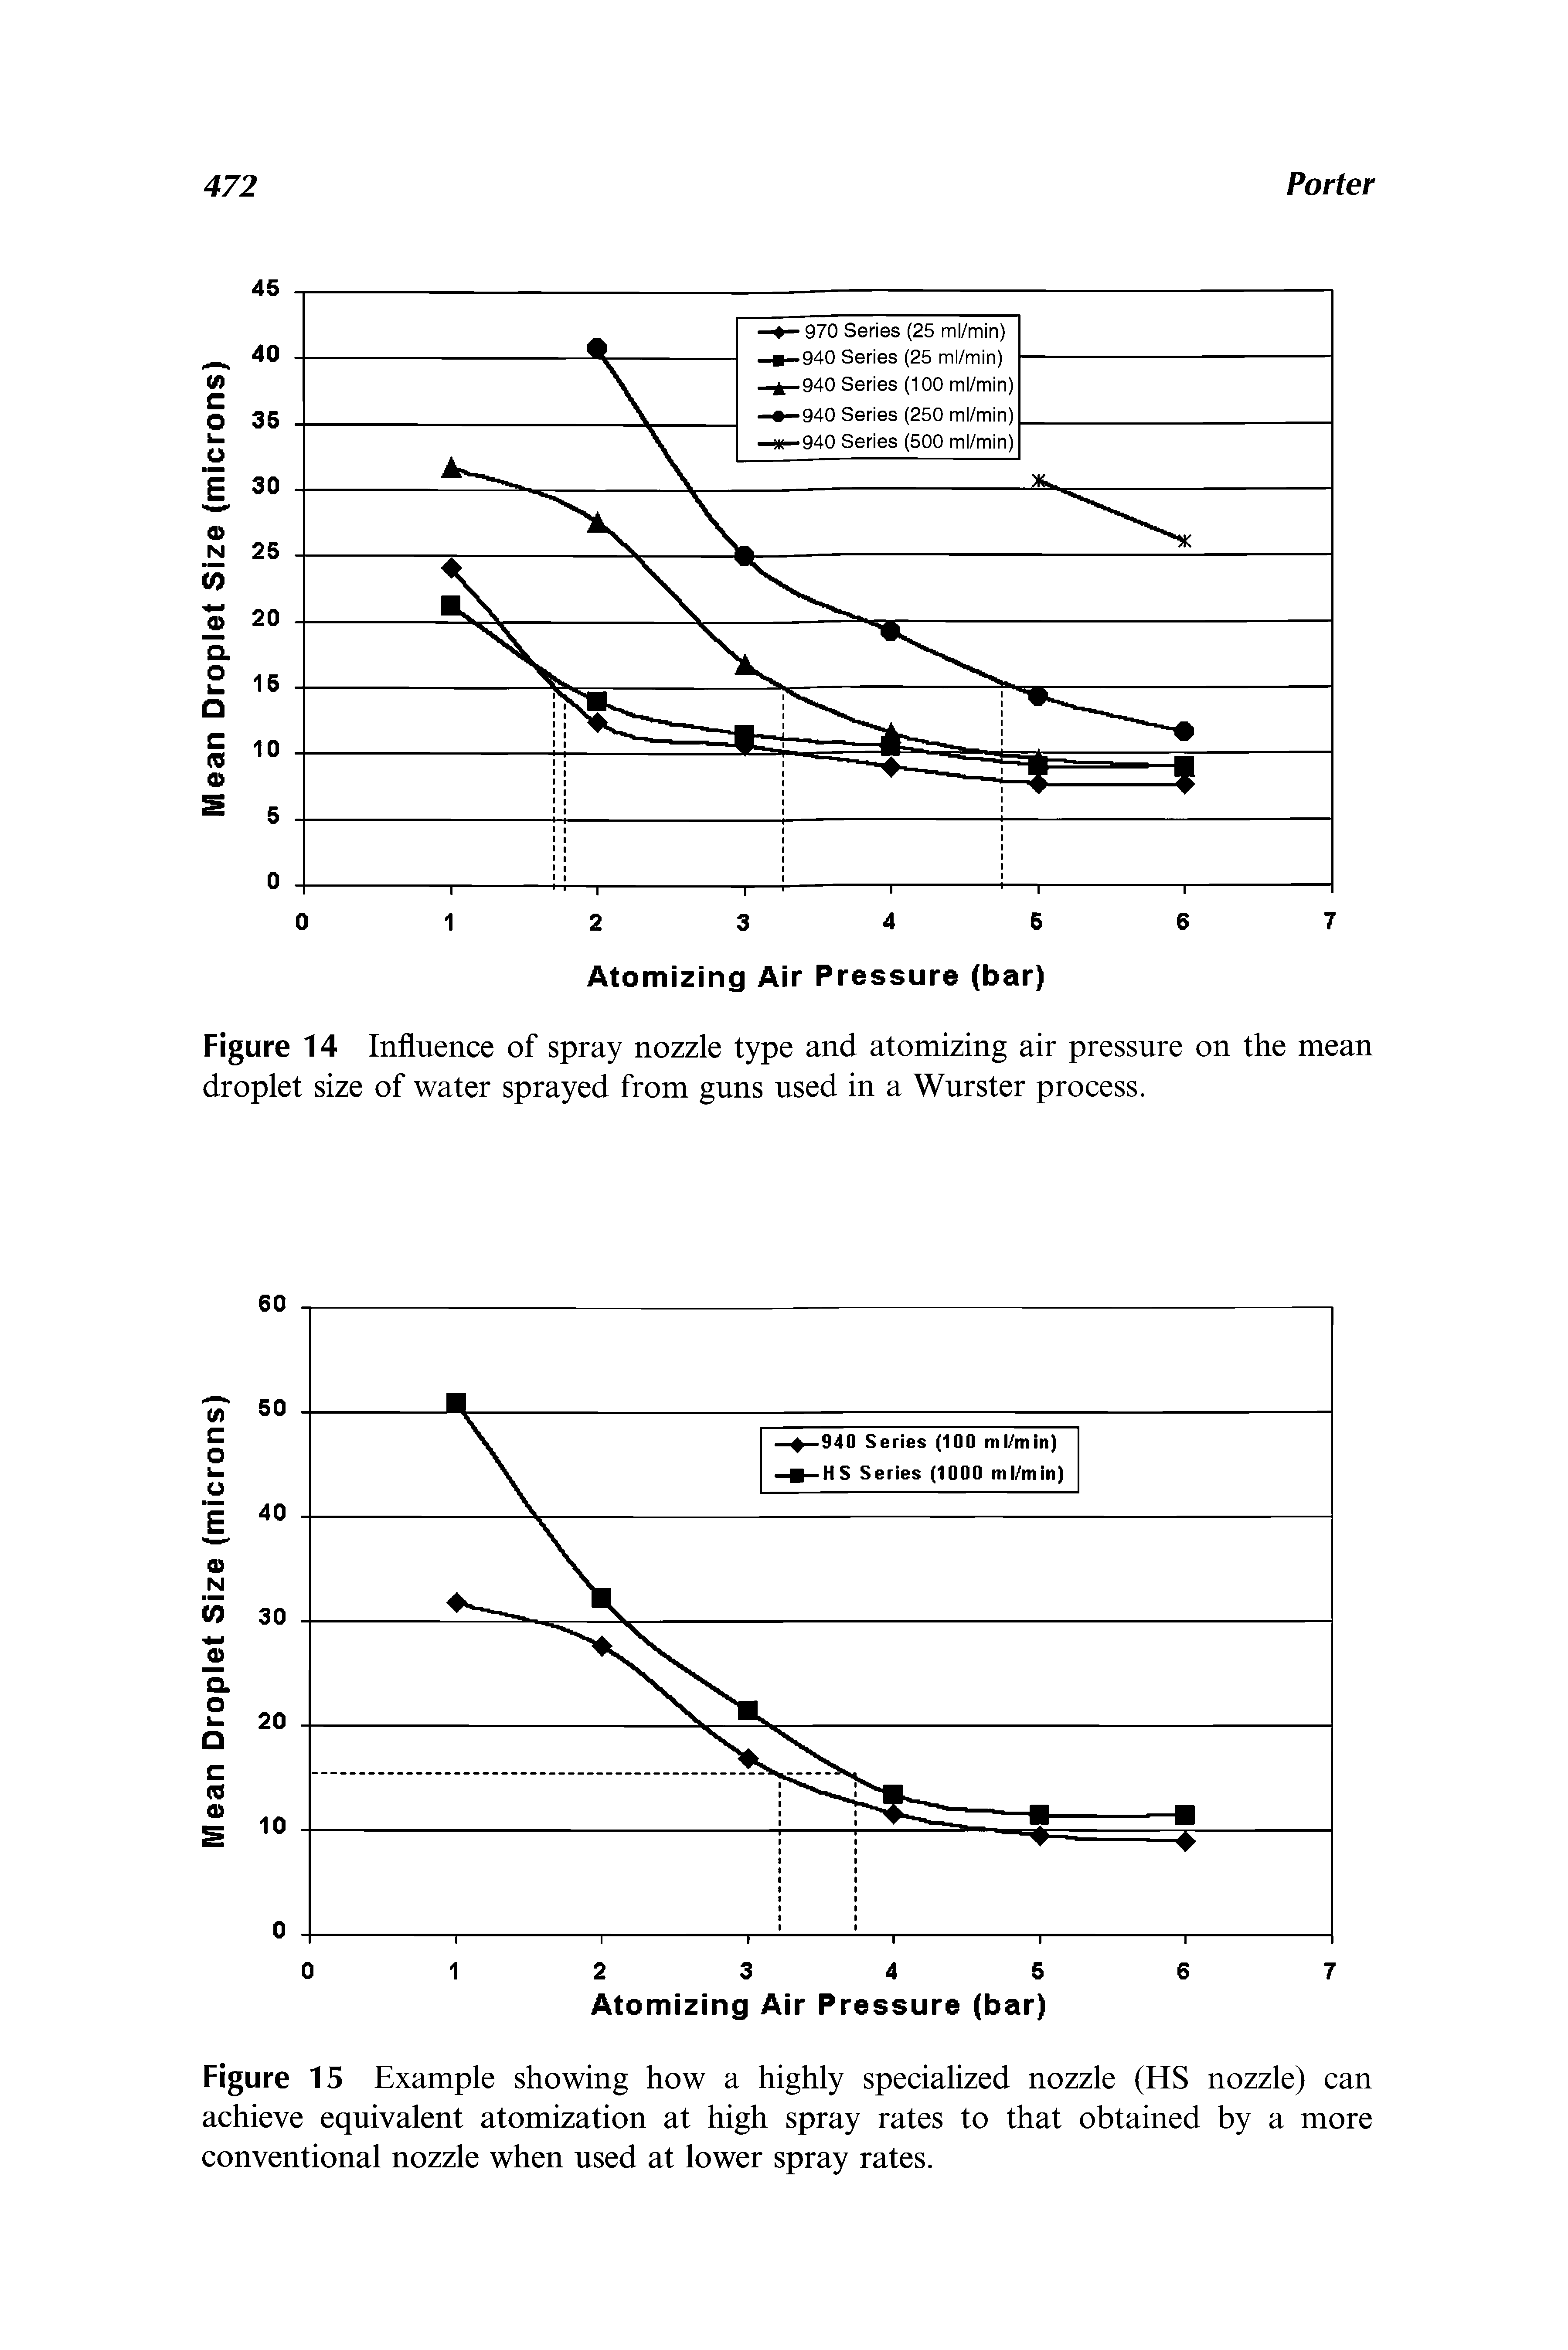 Figure 14 Influence of spray nozzle type and atomizing air pressure on the mean droplet size of water sprayed from guns used in a Wurster process.